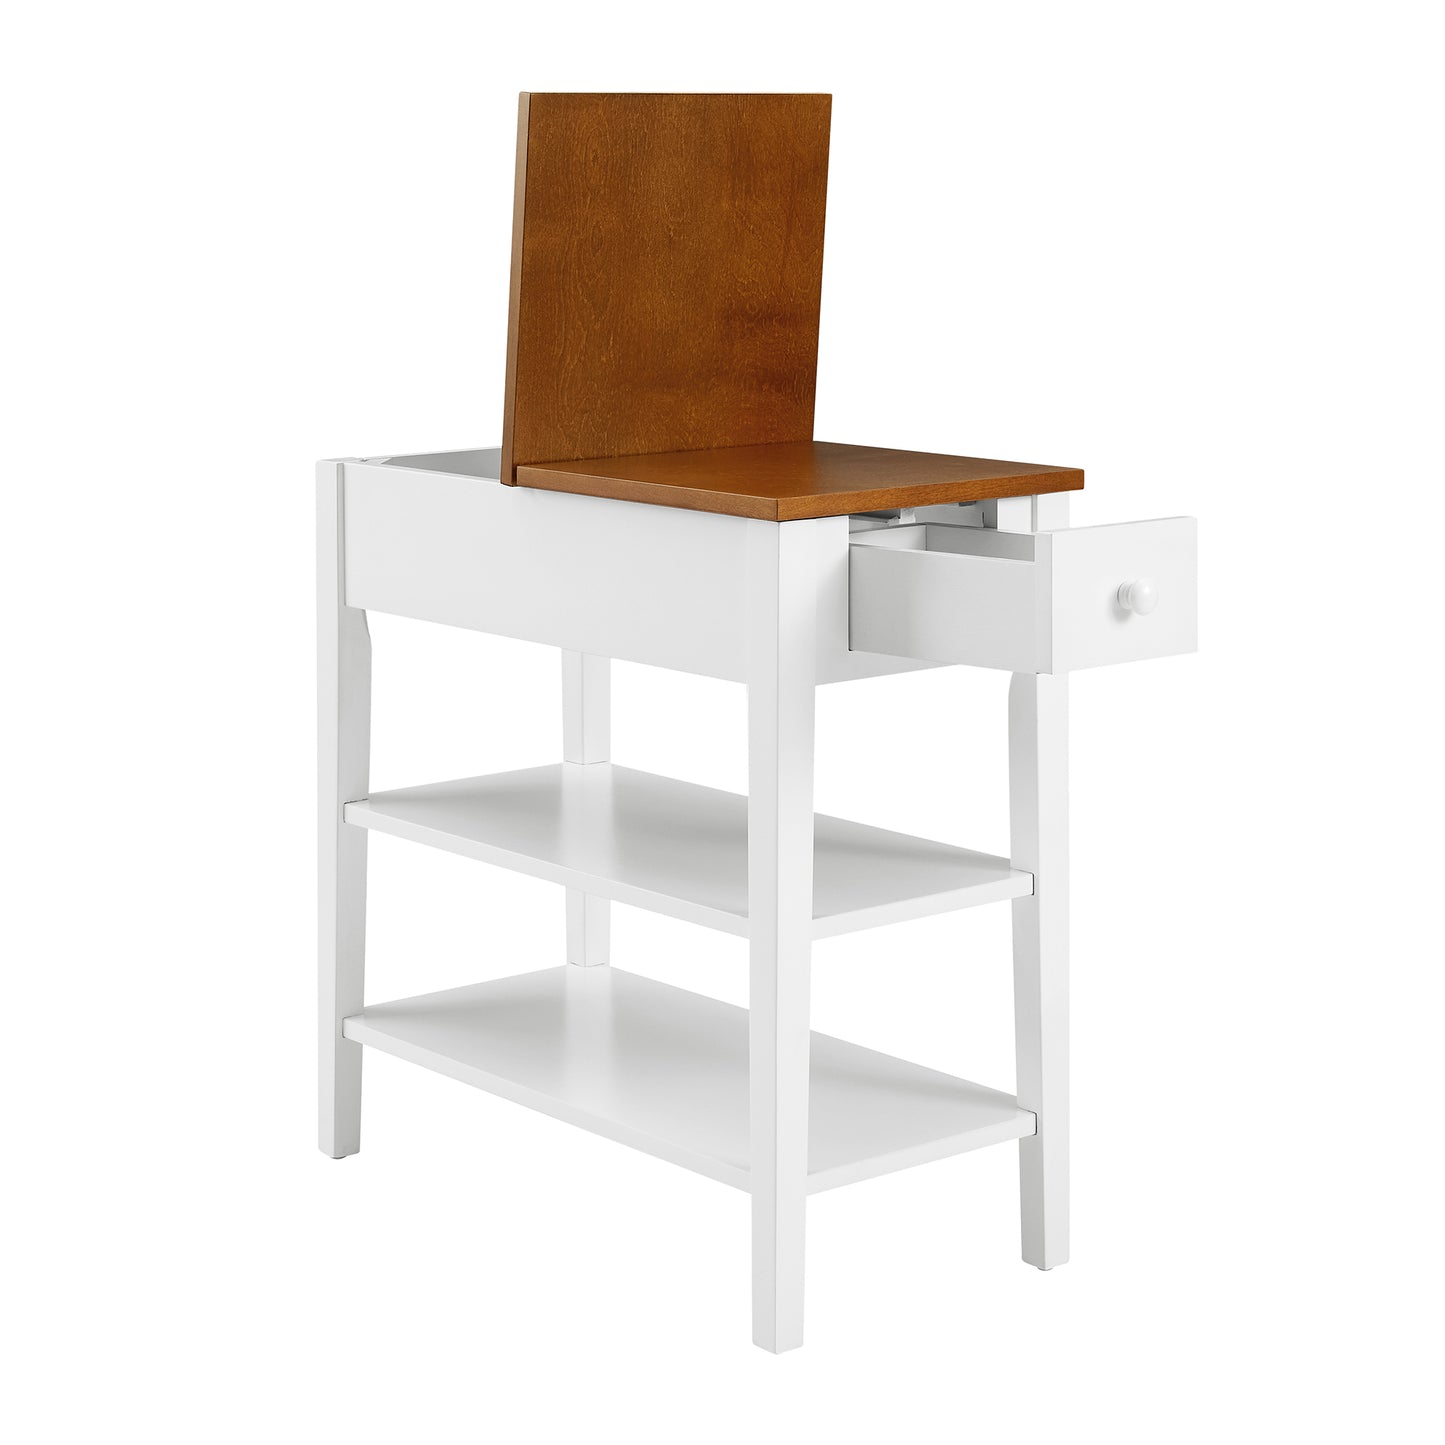 Smart FENDEE End Table with Charging Station and 1 Drawer, 2 Shelf, Solid Wood Legs, Bedroom,11.8"*24"*24.2"